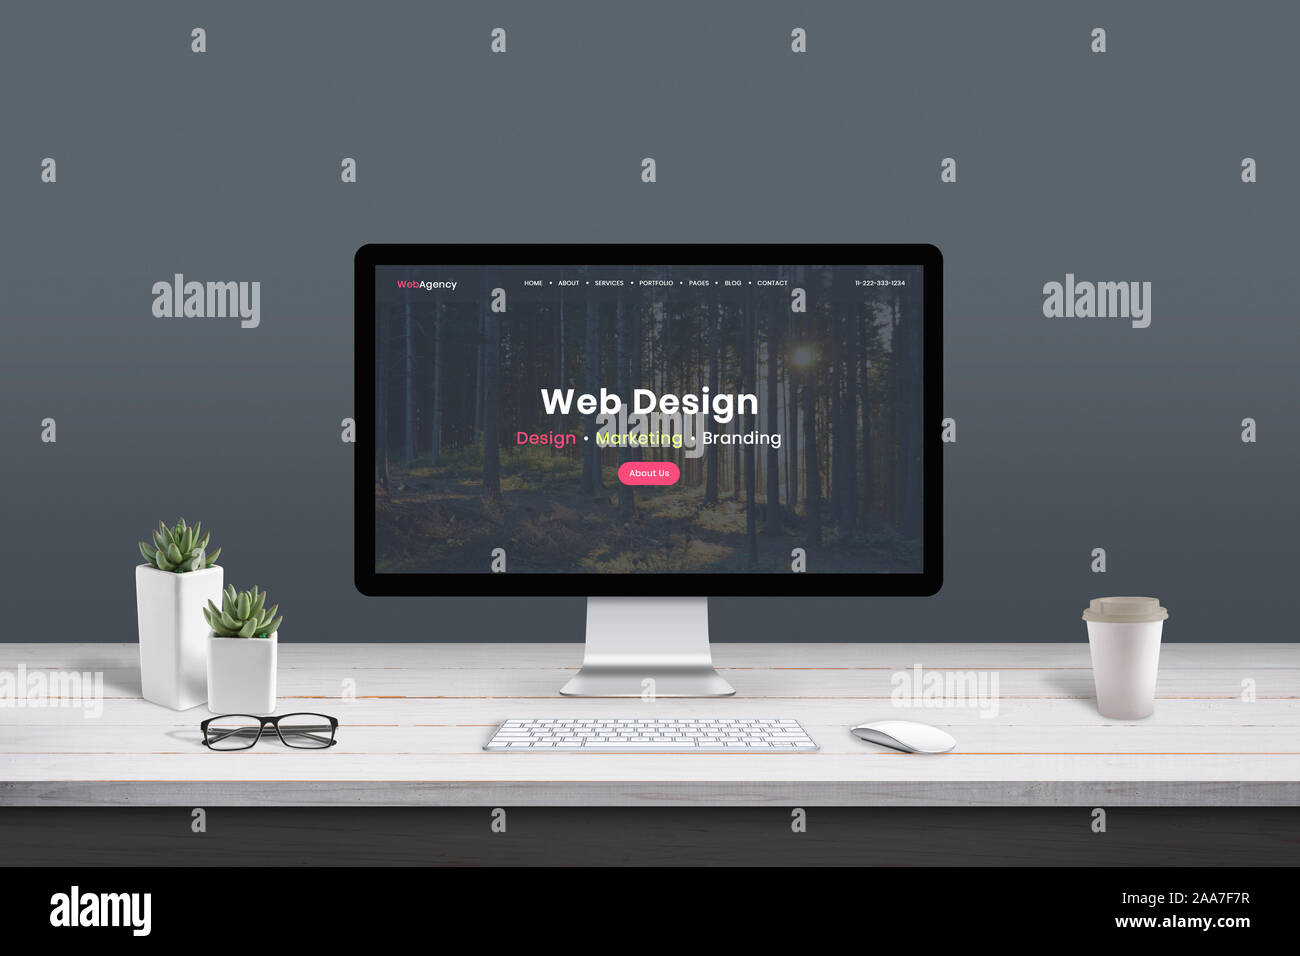 Web design studio concept. Work desk with computer display and modern design web agency page. Stock Photo